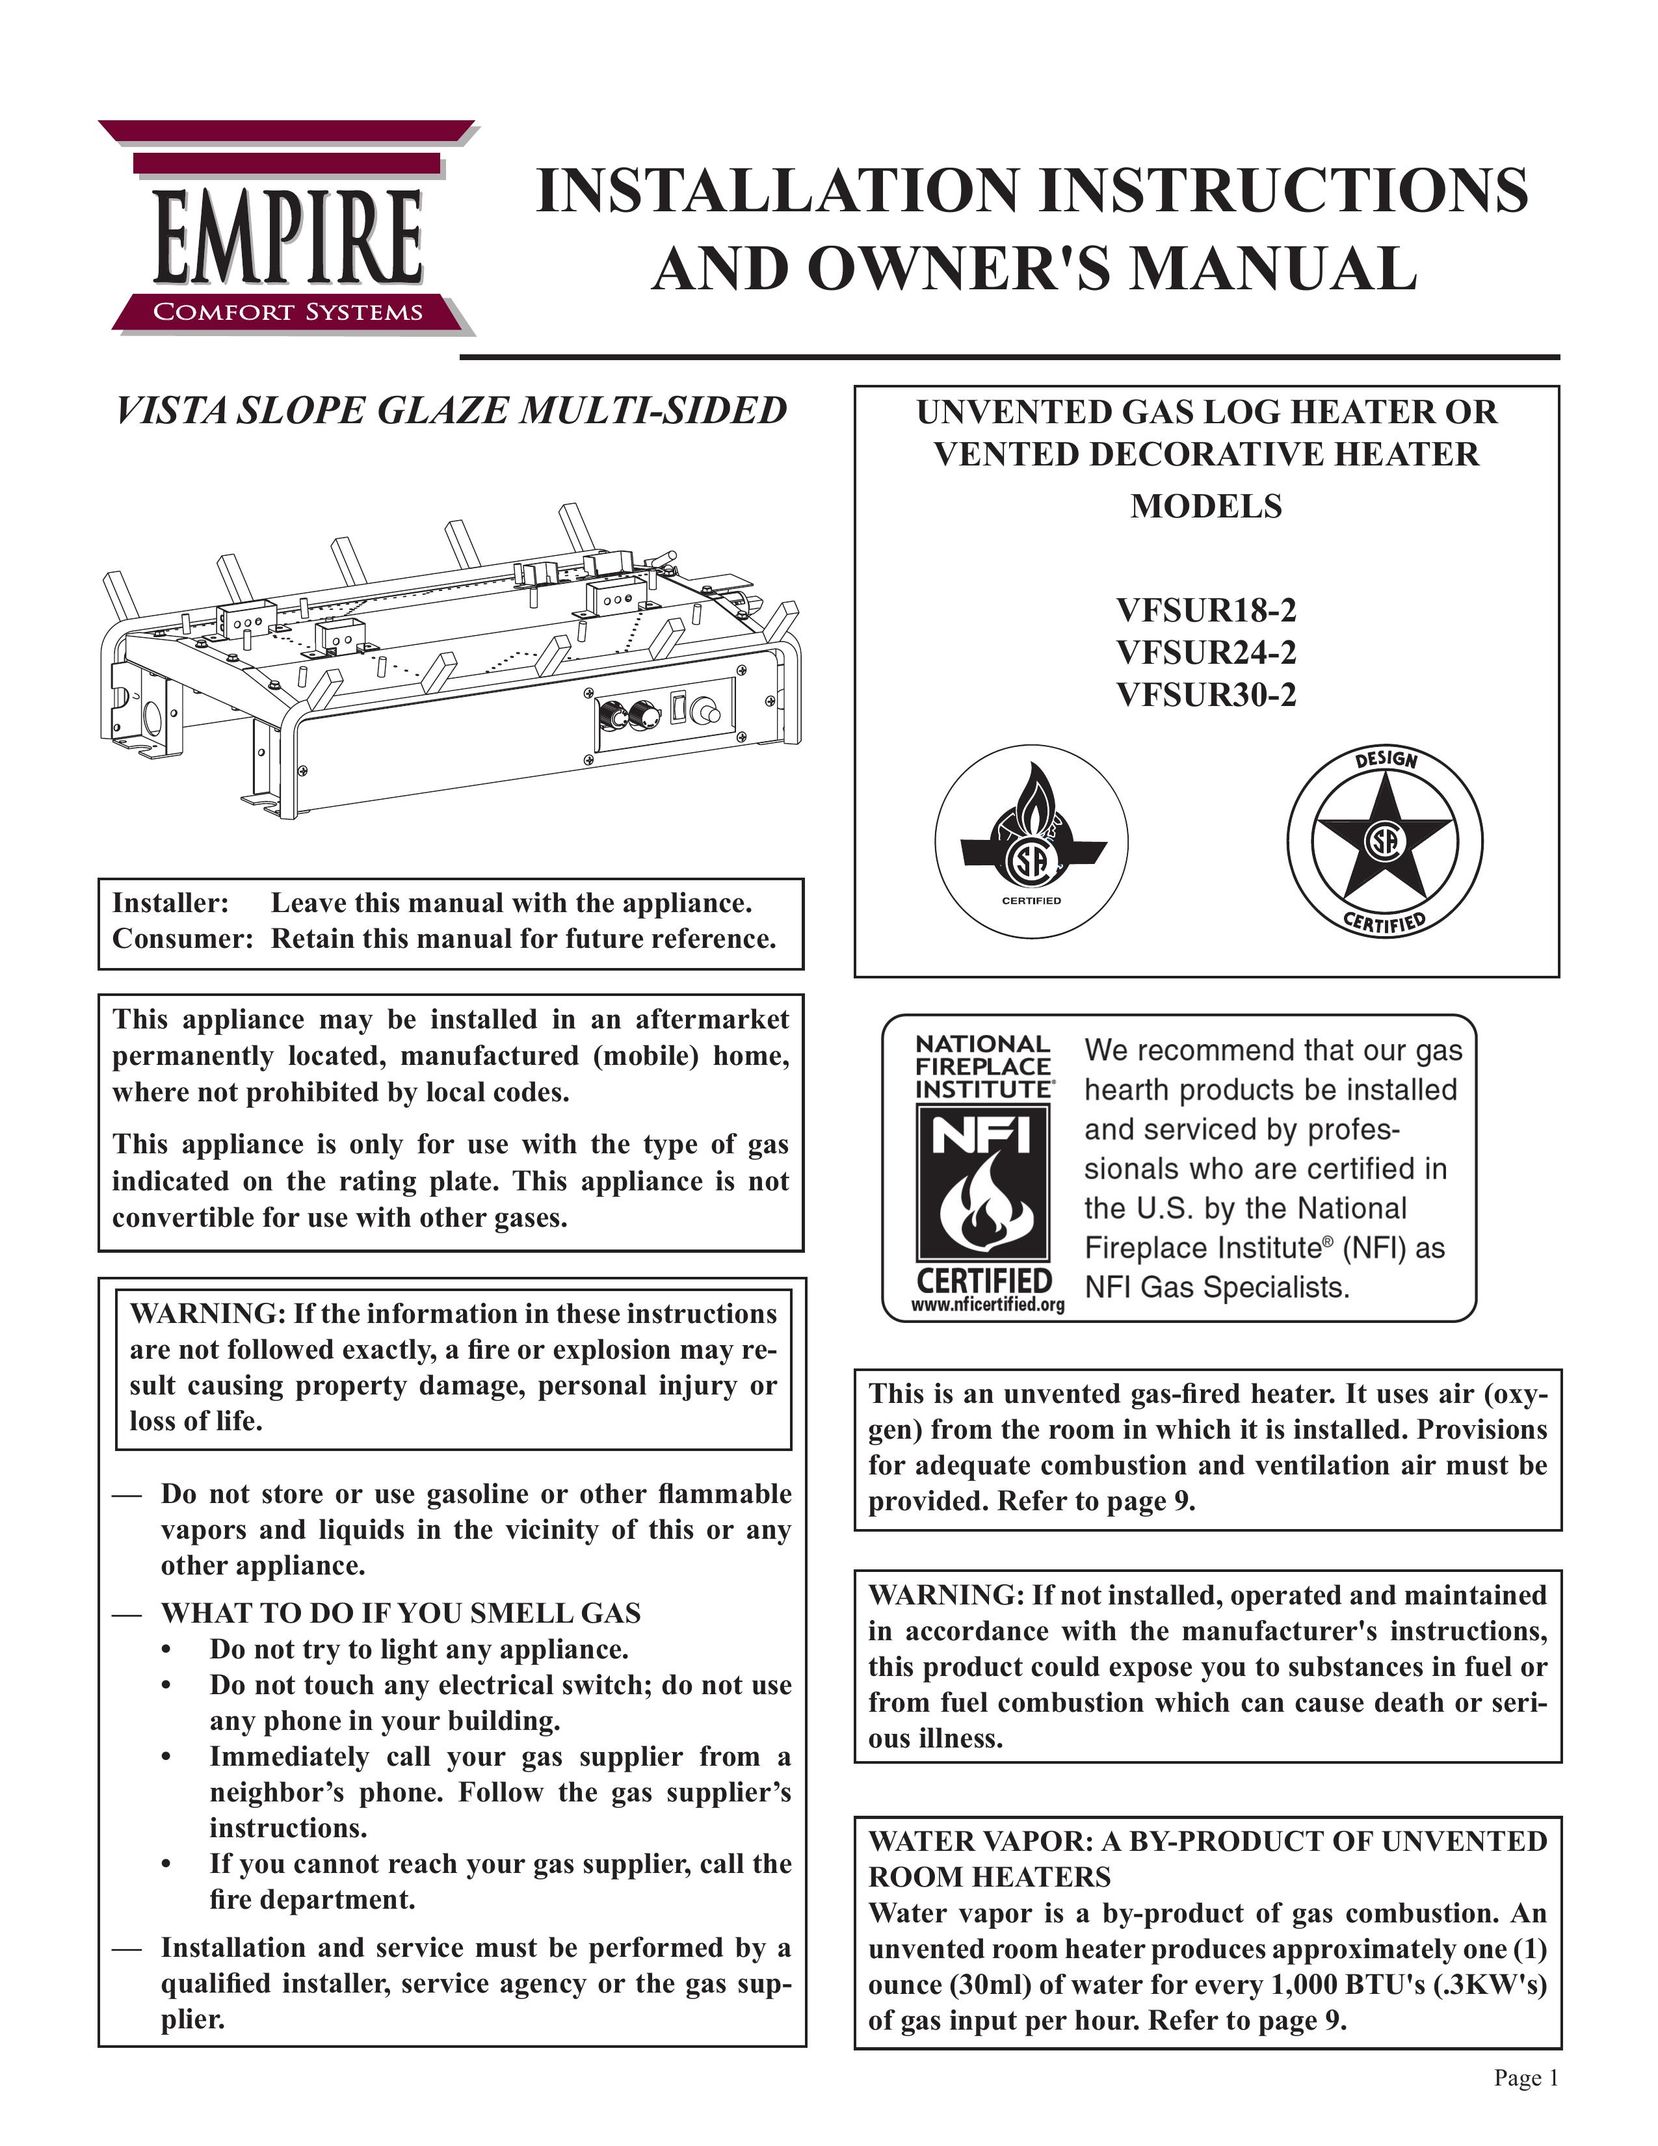 Empire Comfort Systems VFSUR18-2 Gas Heater User Manual